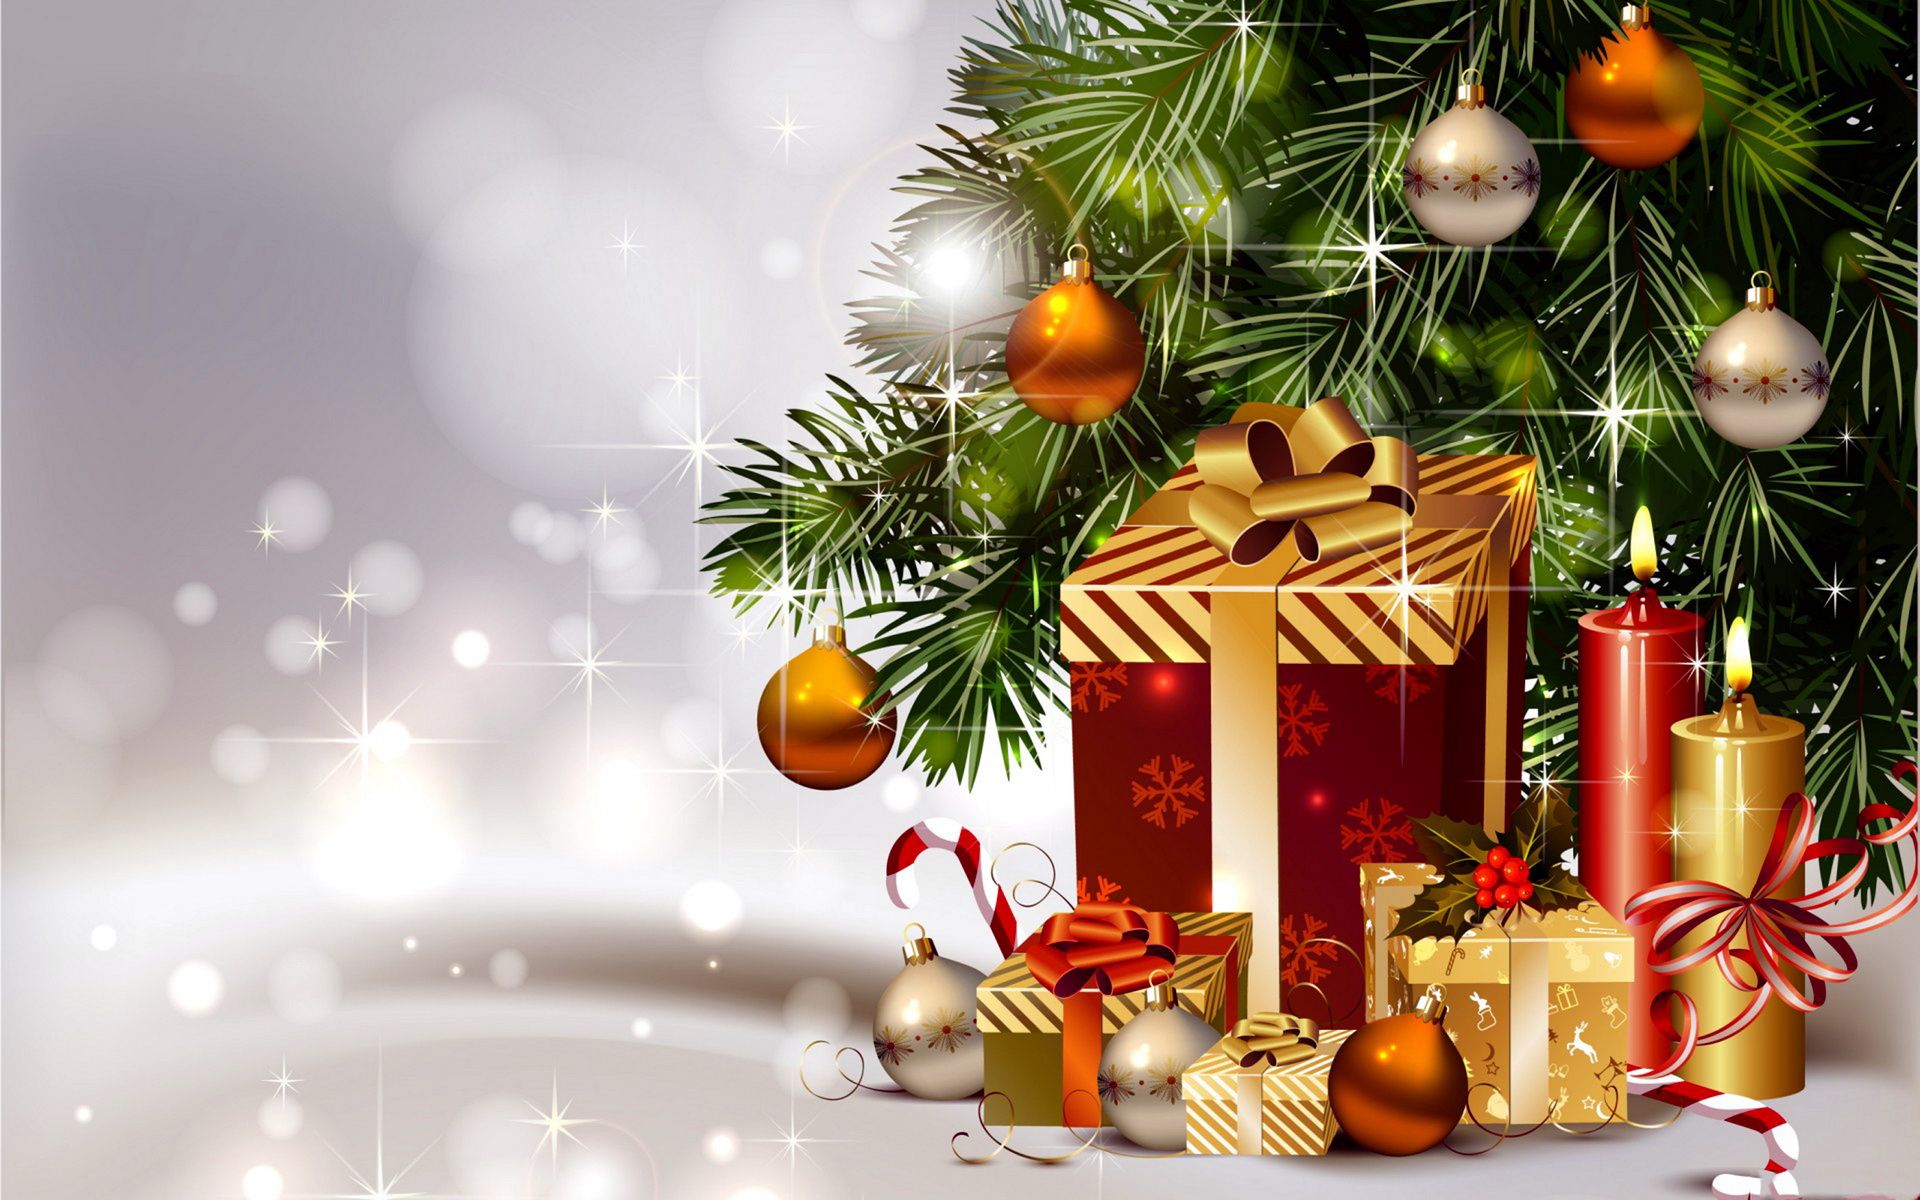 Display Gifts Merry Christmas HD Wallpaper Projects To Try